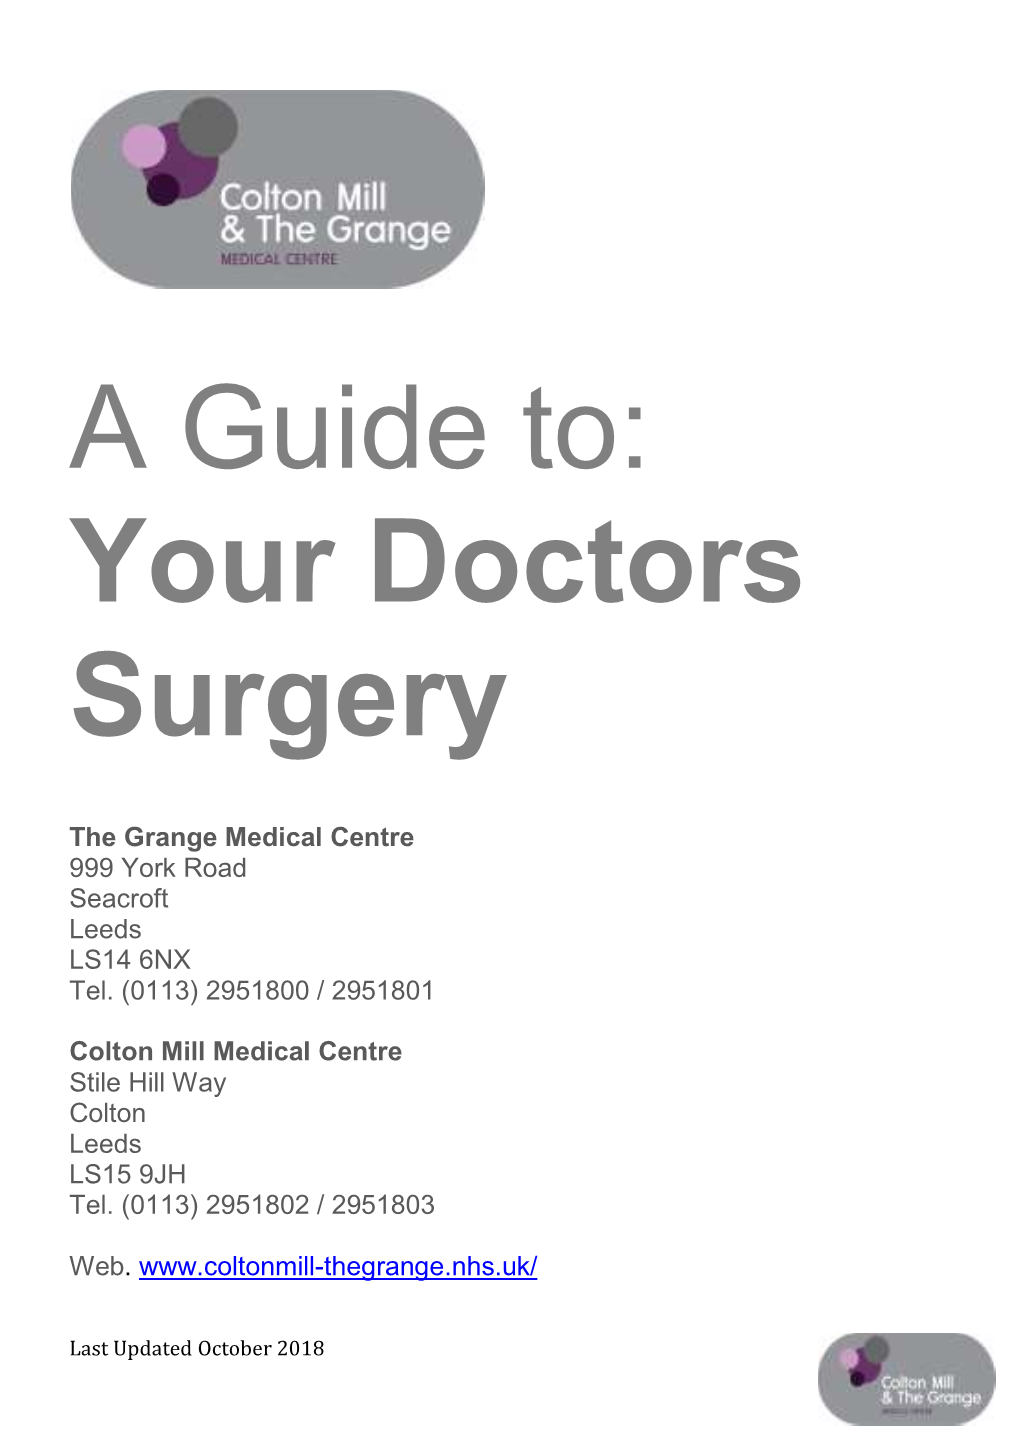 A Guide To: Your Doctors Surgery